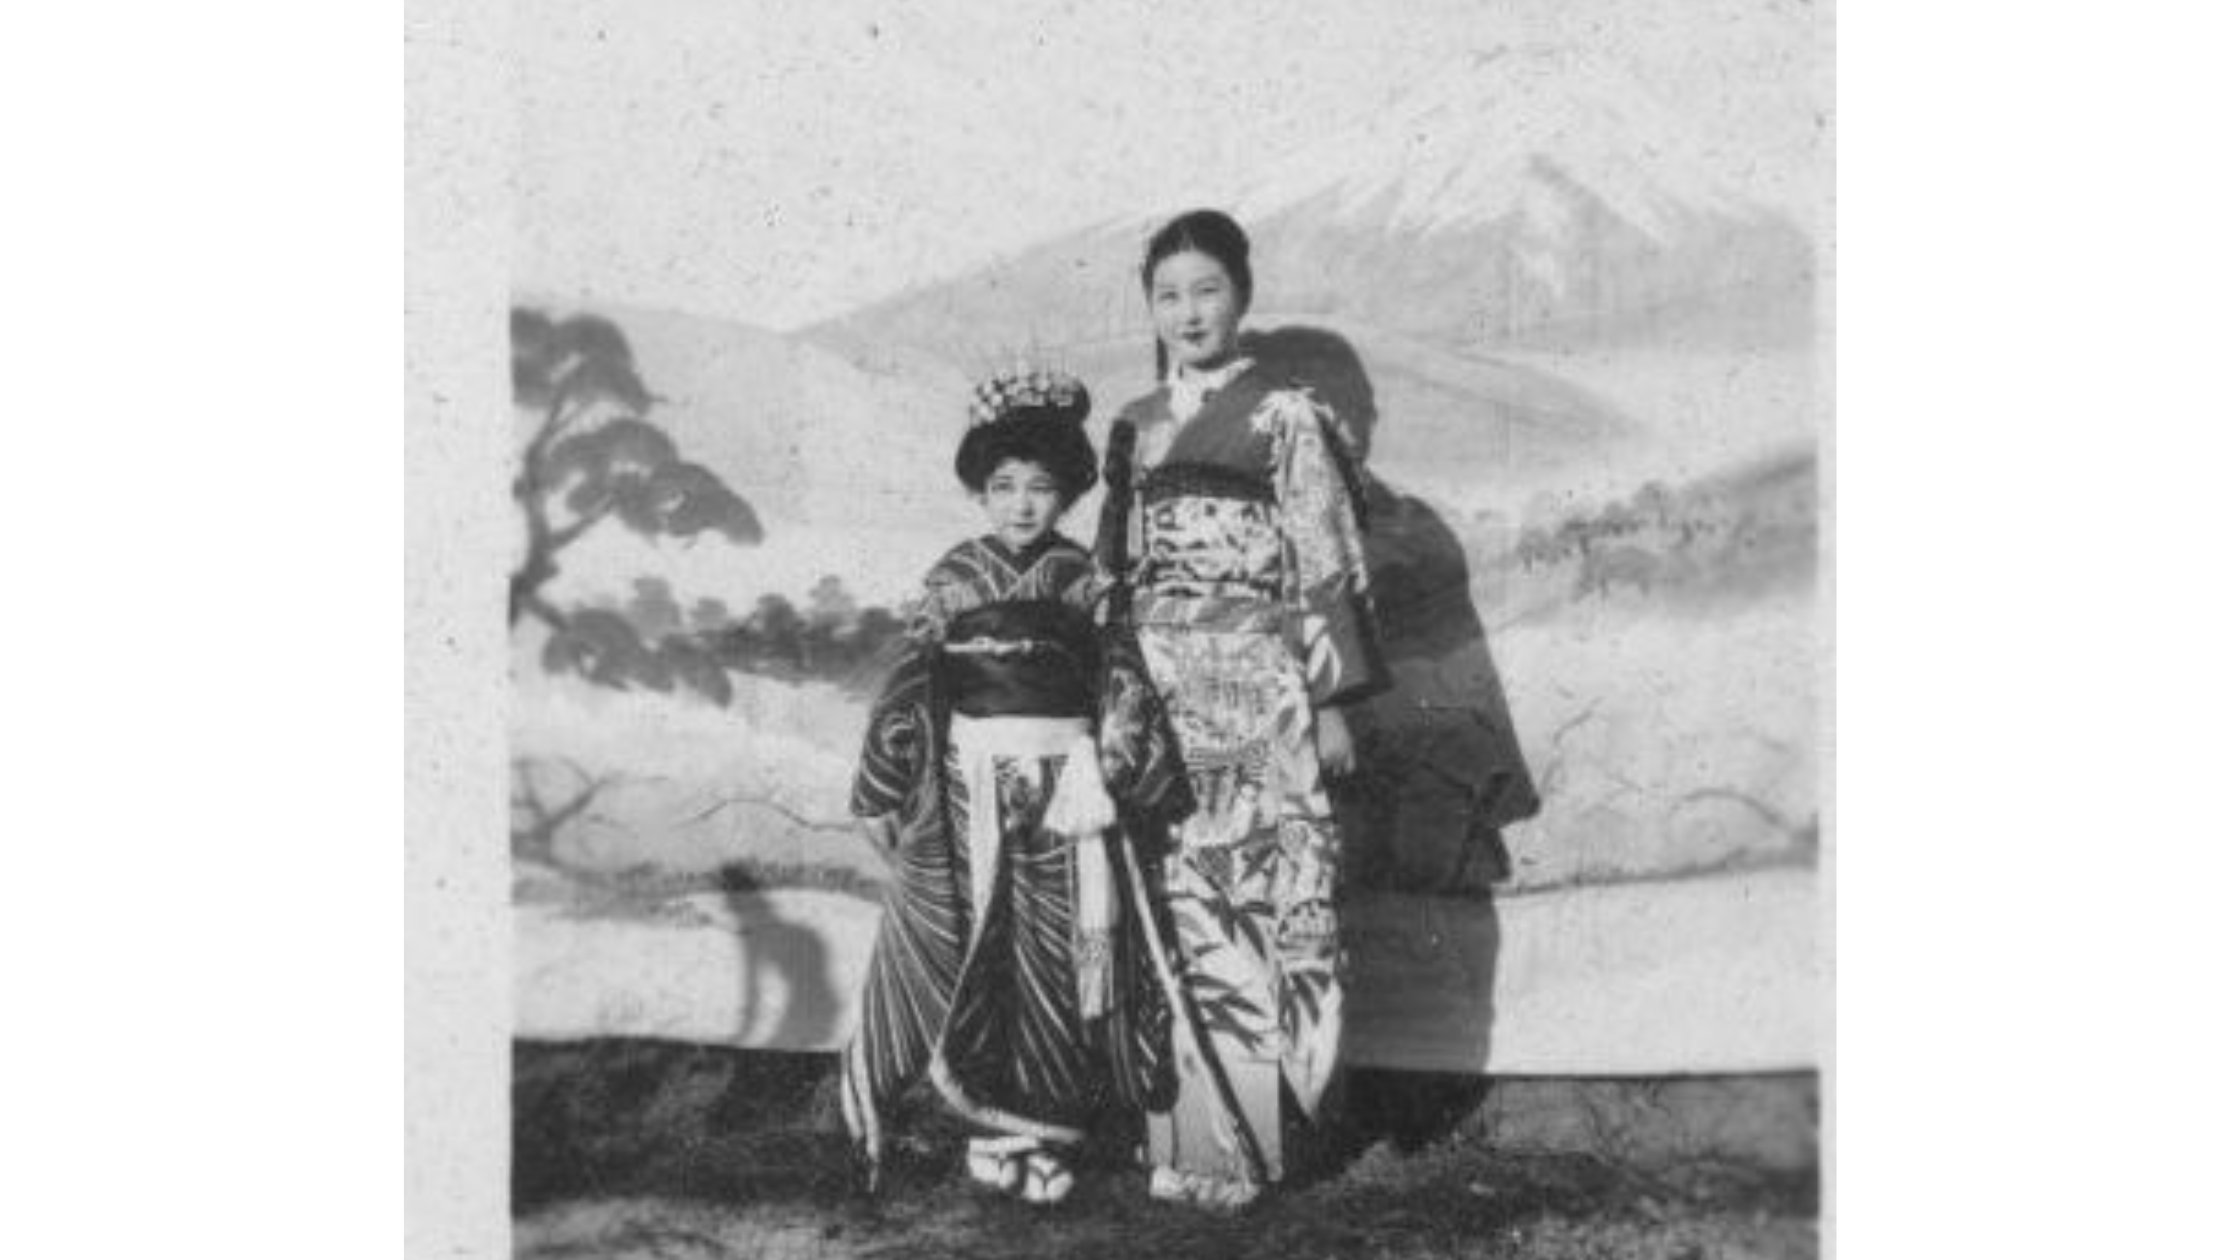 A black and white photo of a woman and child in traditional Japanese formal attire.